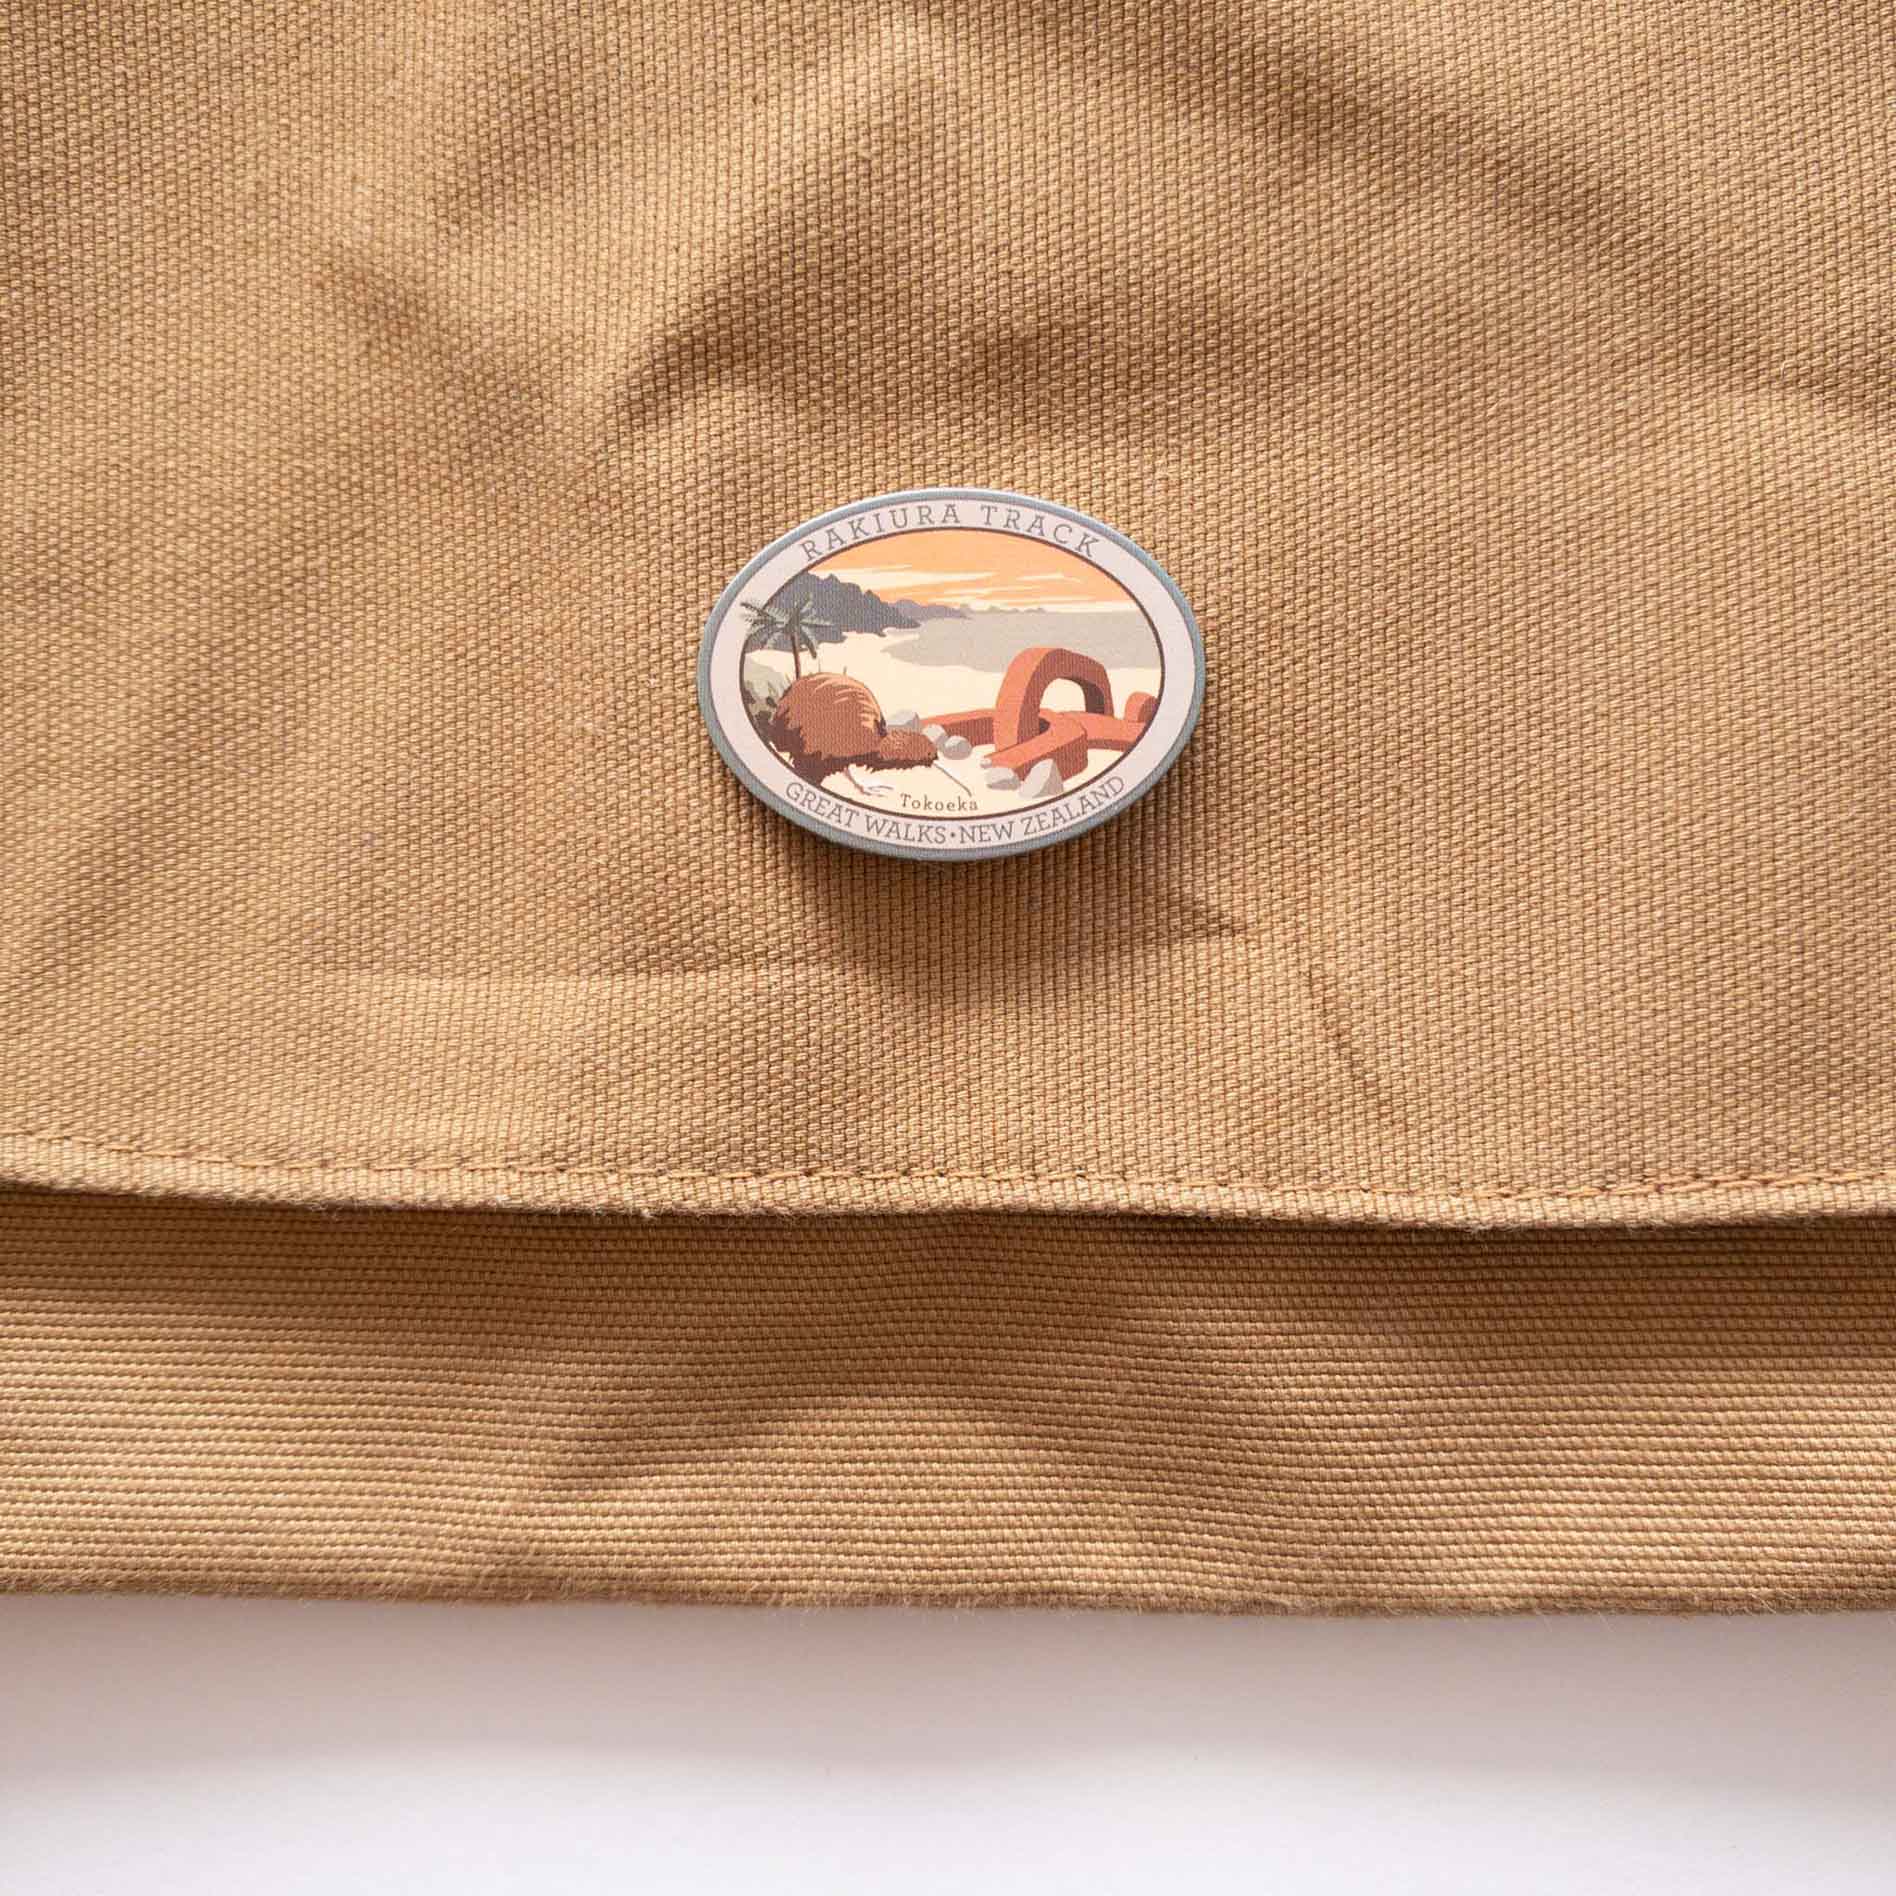 Oval Tongaririo Northern Circuit Track pin, with a karearea/falcon, purple active volcano peak and orange sky, on a brown canvas bag.